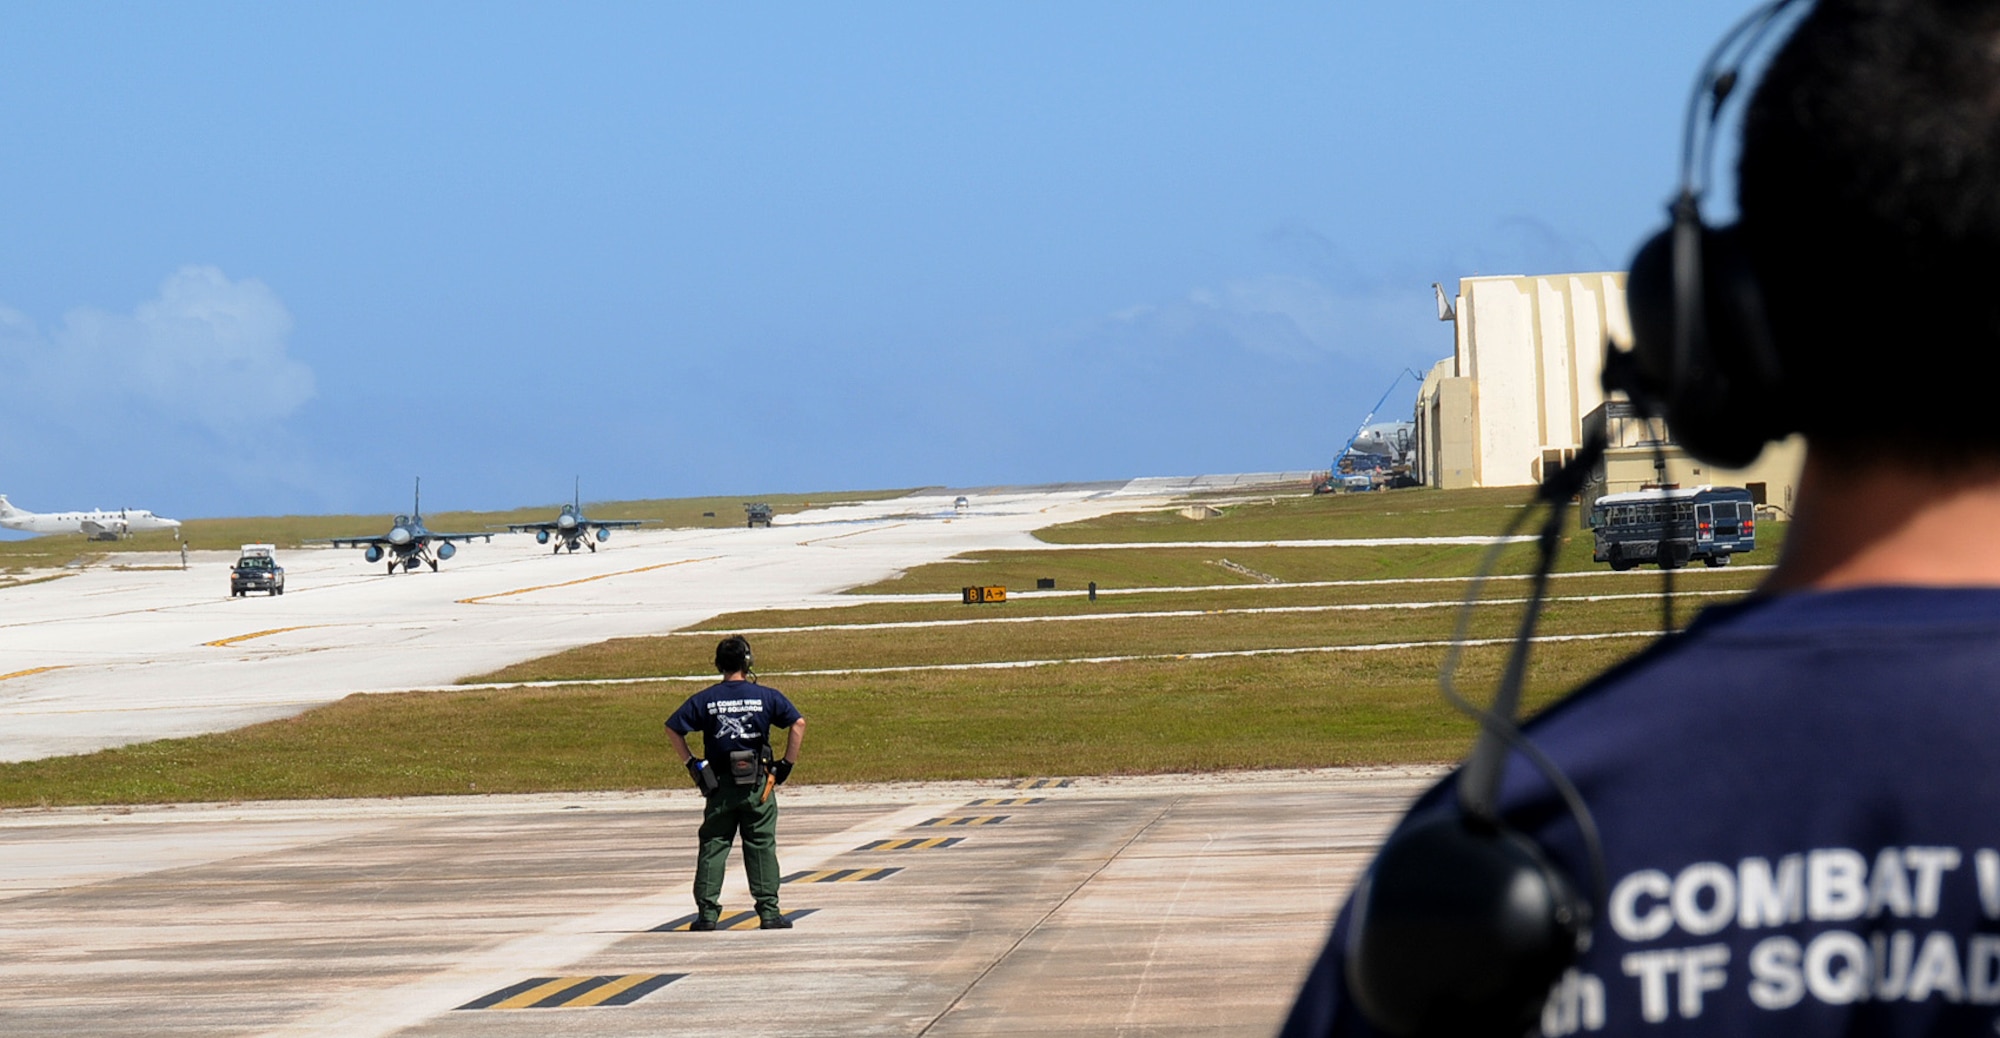 ANDERSEN AIR FORCE BASE, Guam - Japan Air Self Defense Force maintainers stand ready as two JASDF F-2 attack fighters taxi down the flight line here Jan. 30. The F-2's arrived at Andersen to participate in exercise Cope North. The exercise is one of the longest-running series of exercises in the Pacific theater. Since the first Cope North exercise in 1978, thousands of American and Japanese personnel have honed skills that are vital to maintaining a high level of readiness. (U.S. Air Force photo by Senior Airman Nichelle Griffiths)